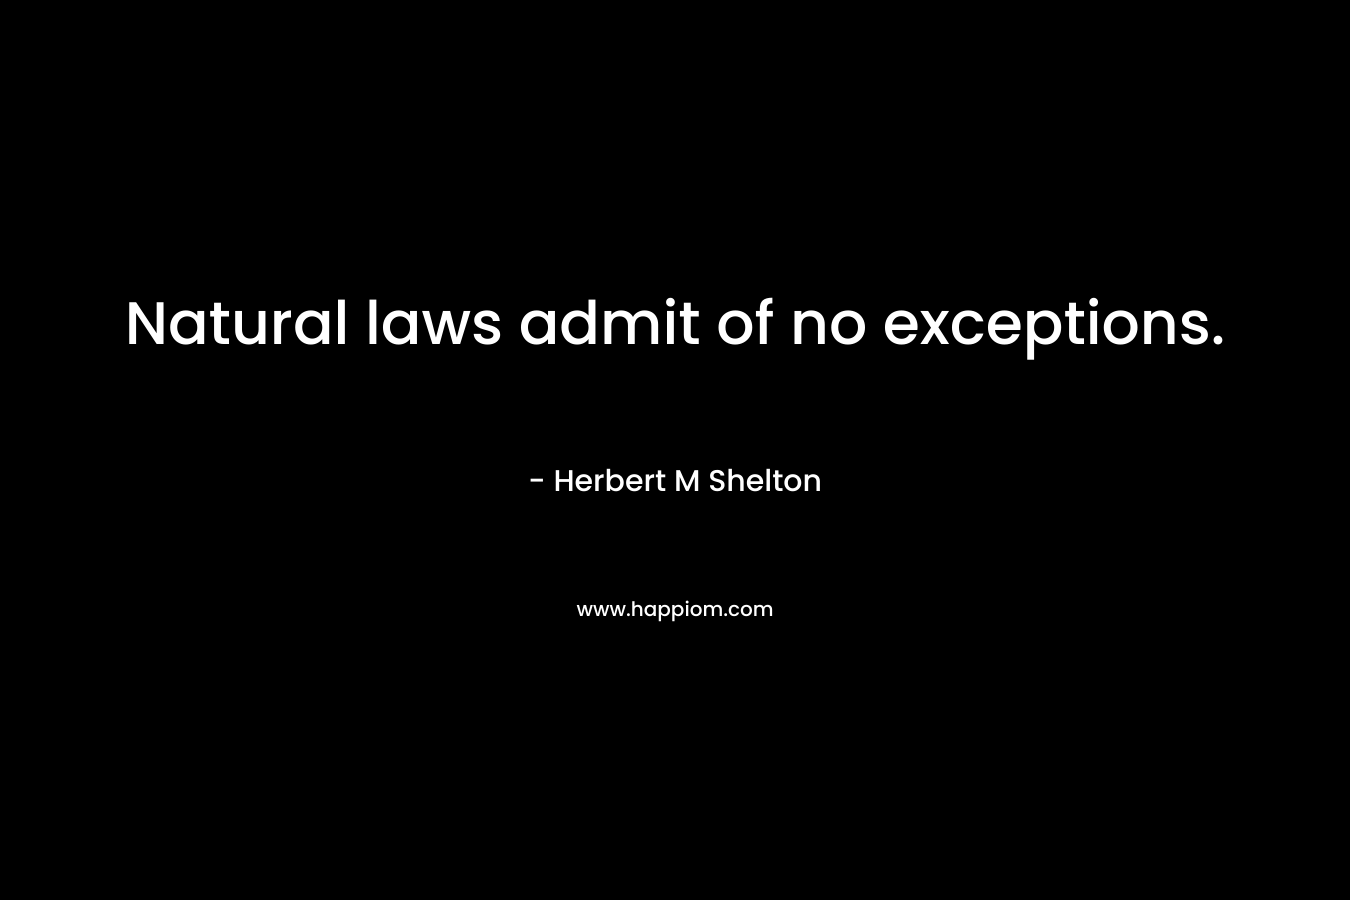 Natural laws admit of no exceptions.